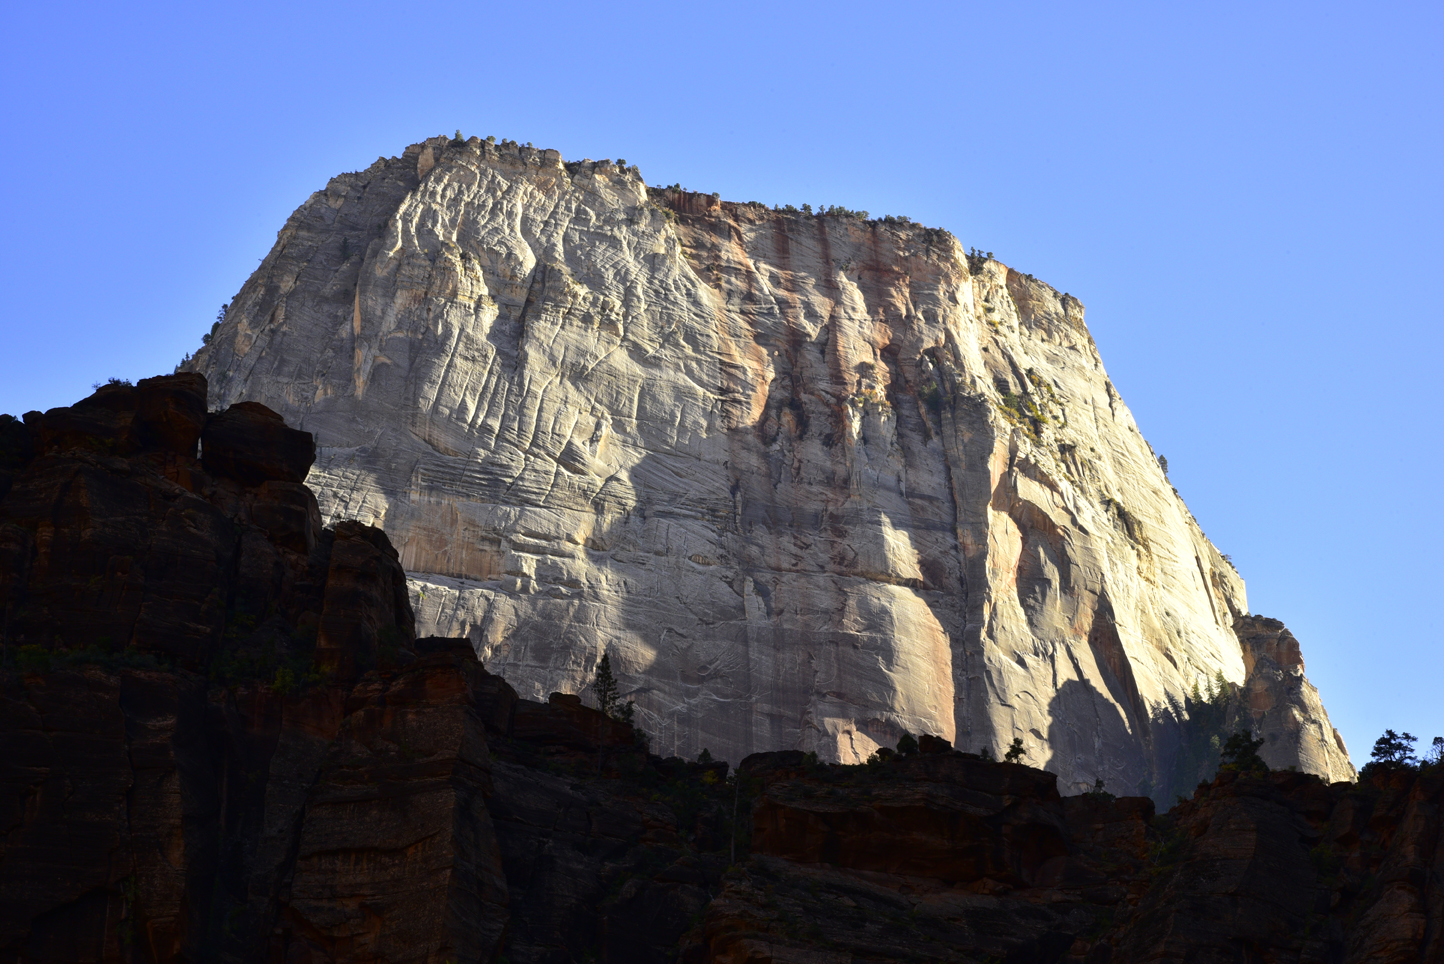 The Great White Throne  -  Big Bend area, Zion Canyon, Zion National Park, Utah